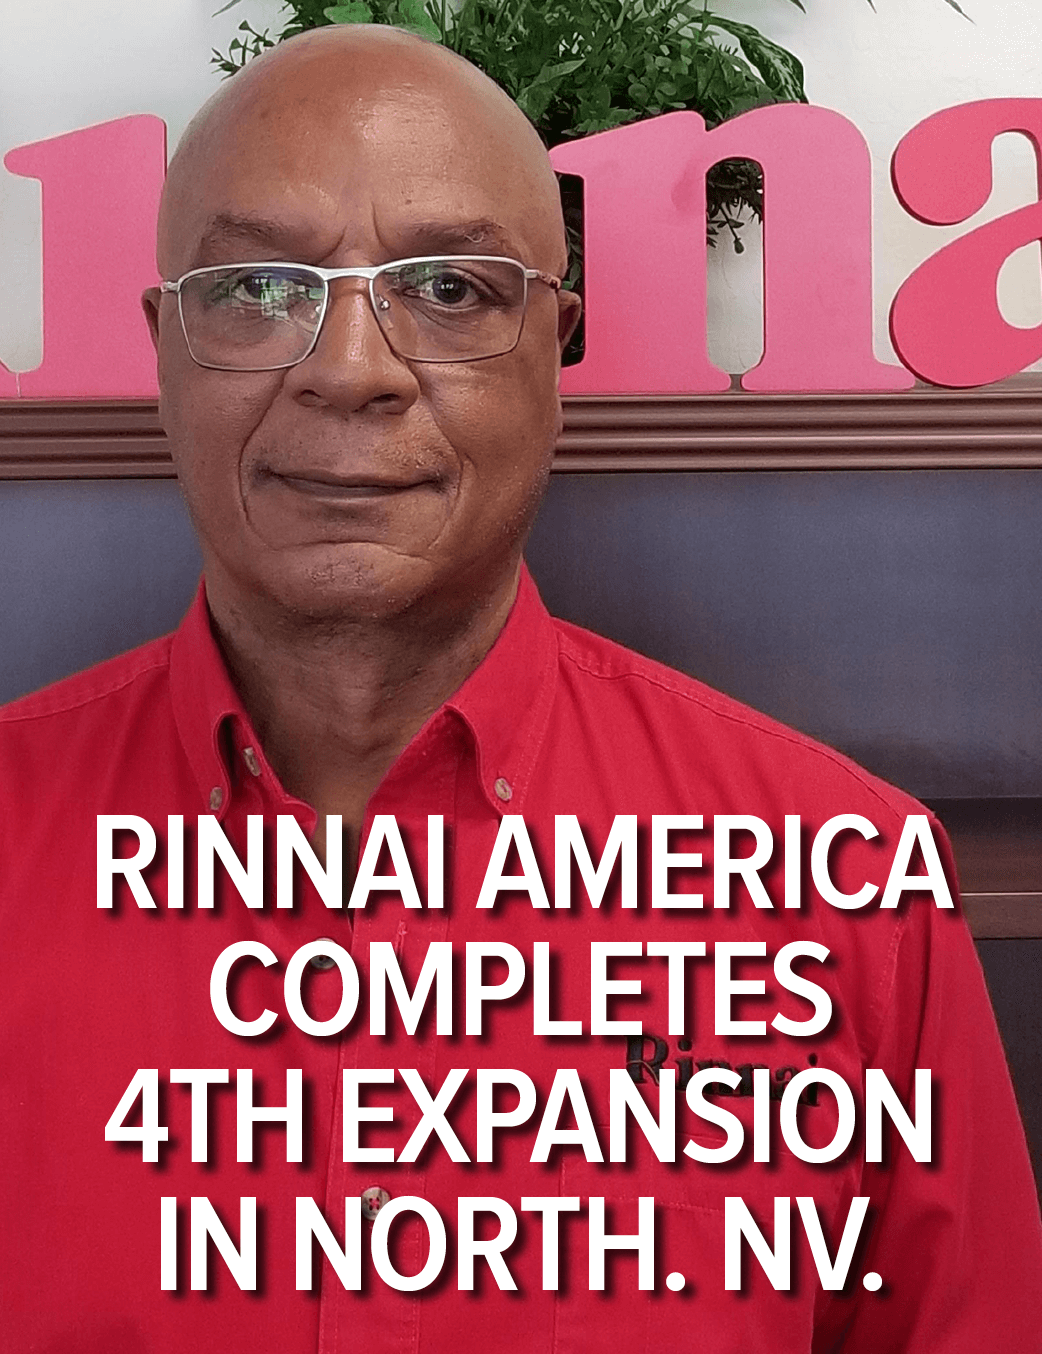  Rinnai Sets Up West Coast Manufacturing Plant in Reno, Nv.